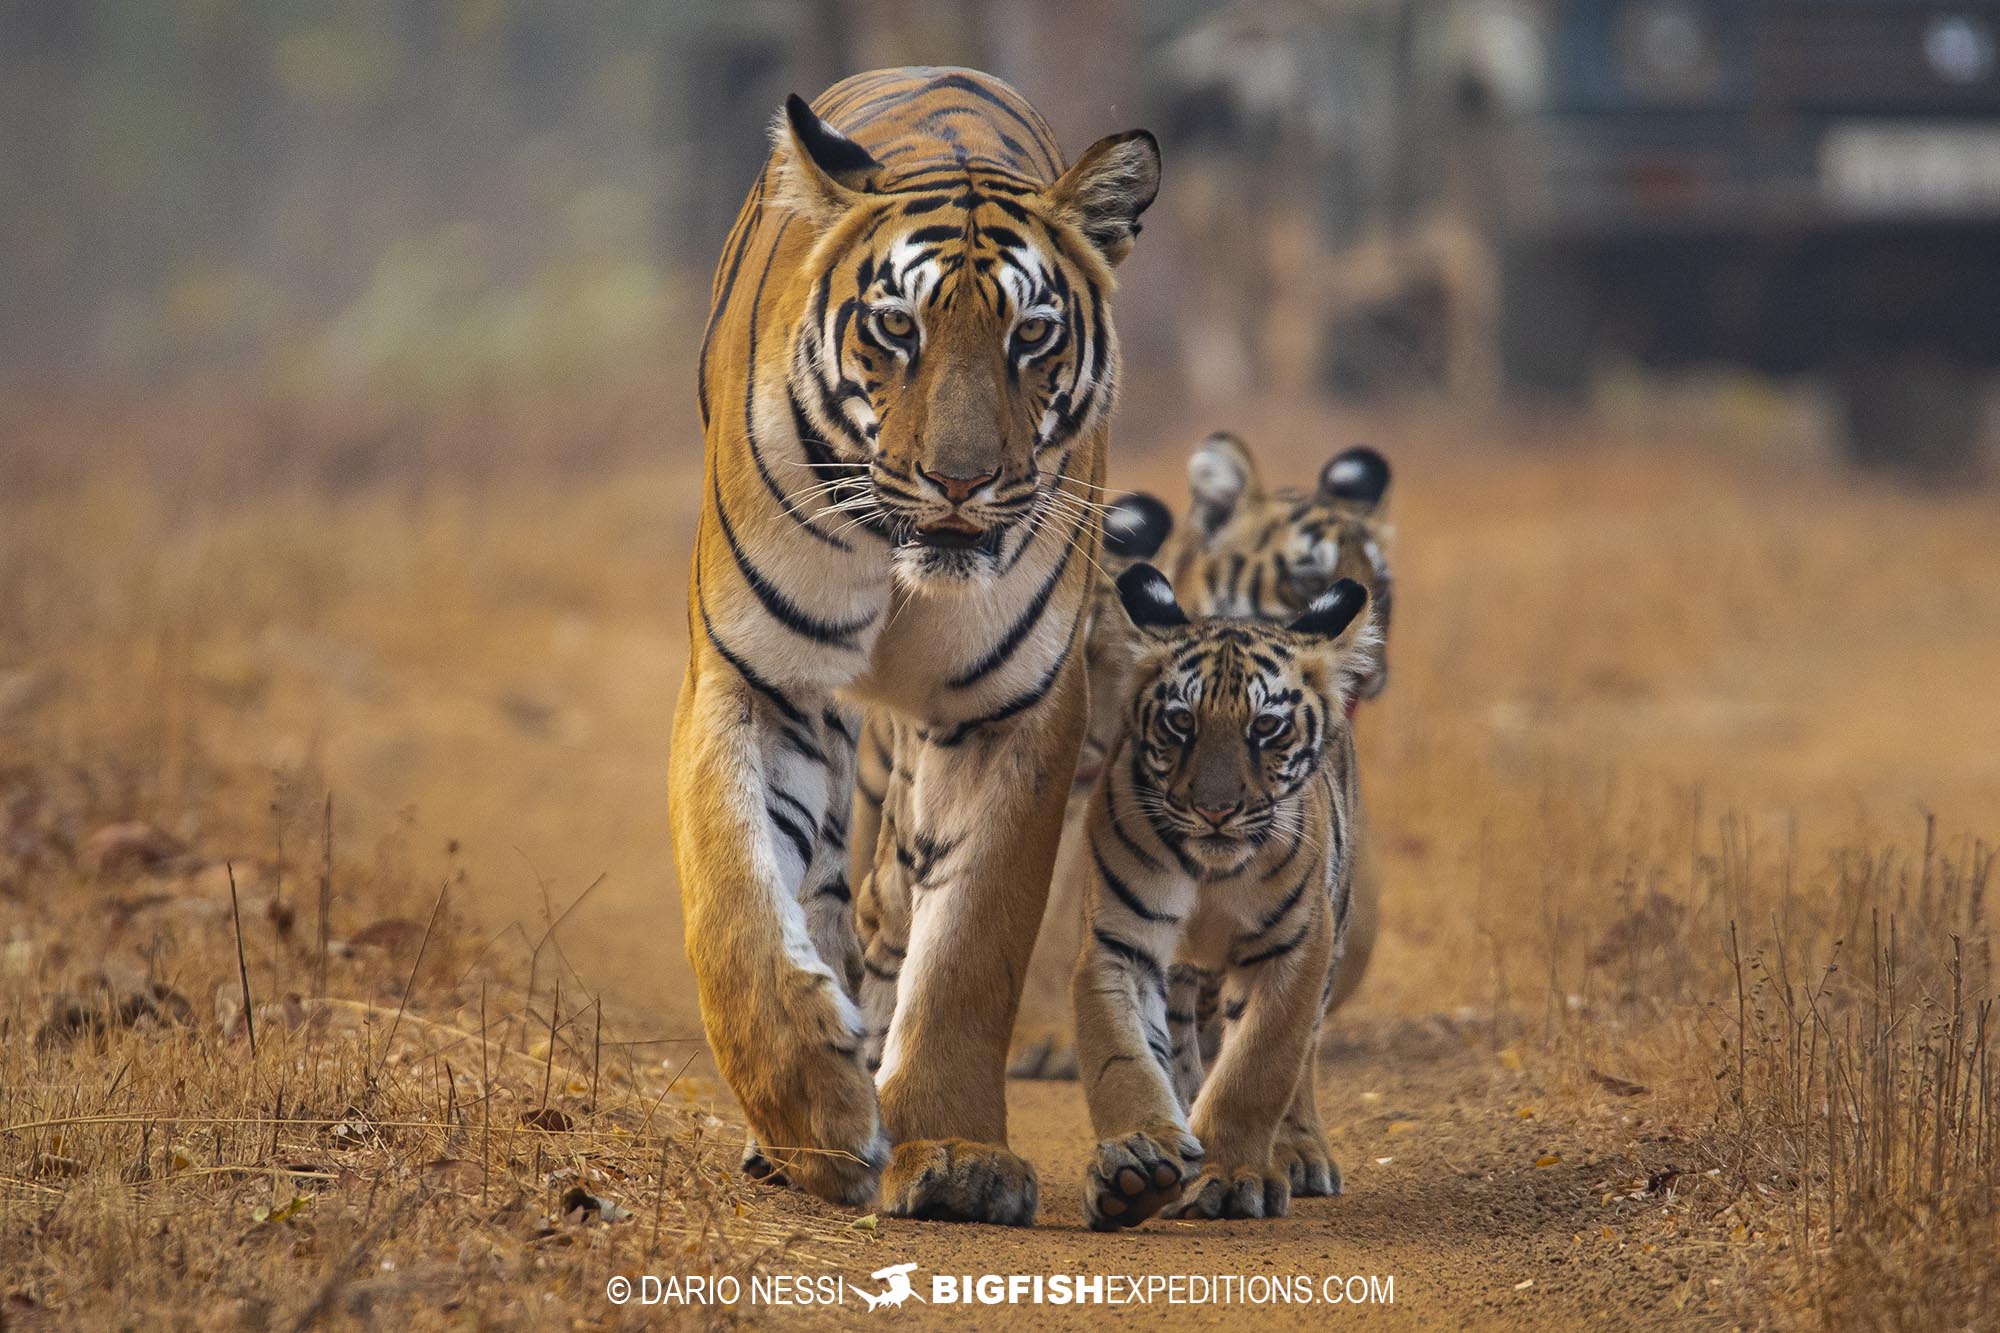 Tiger mother and cubs. Wildlife photography tour in Tadoba National Park, India.